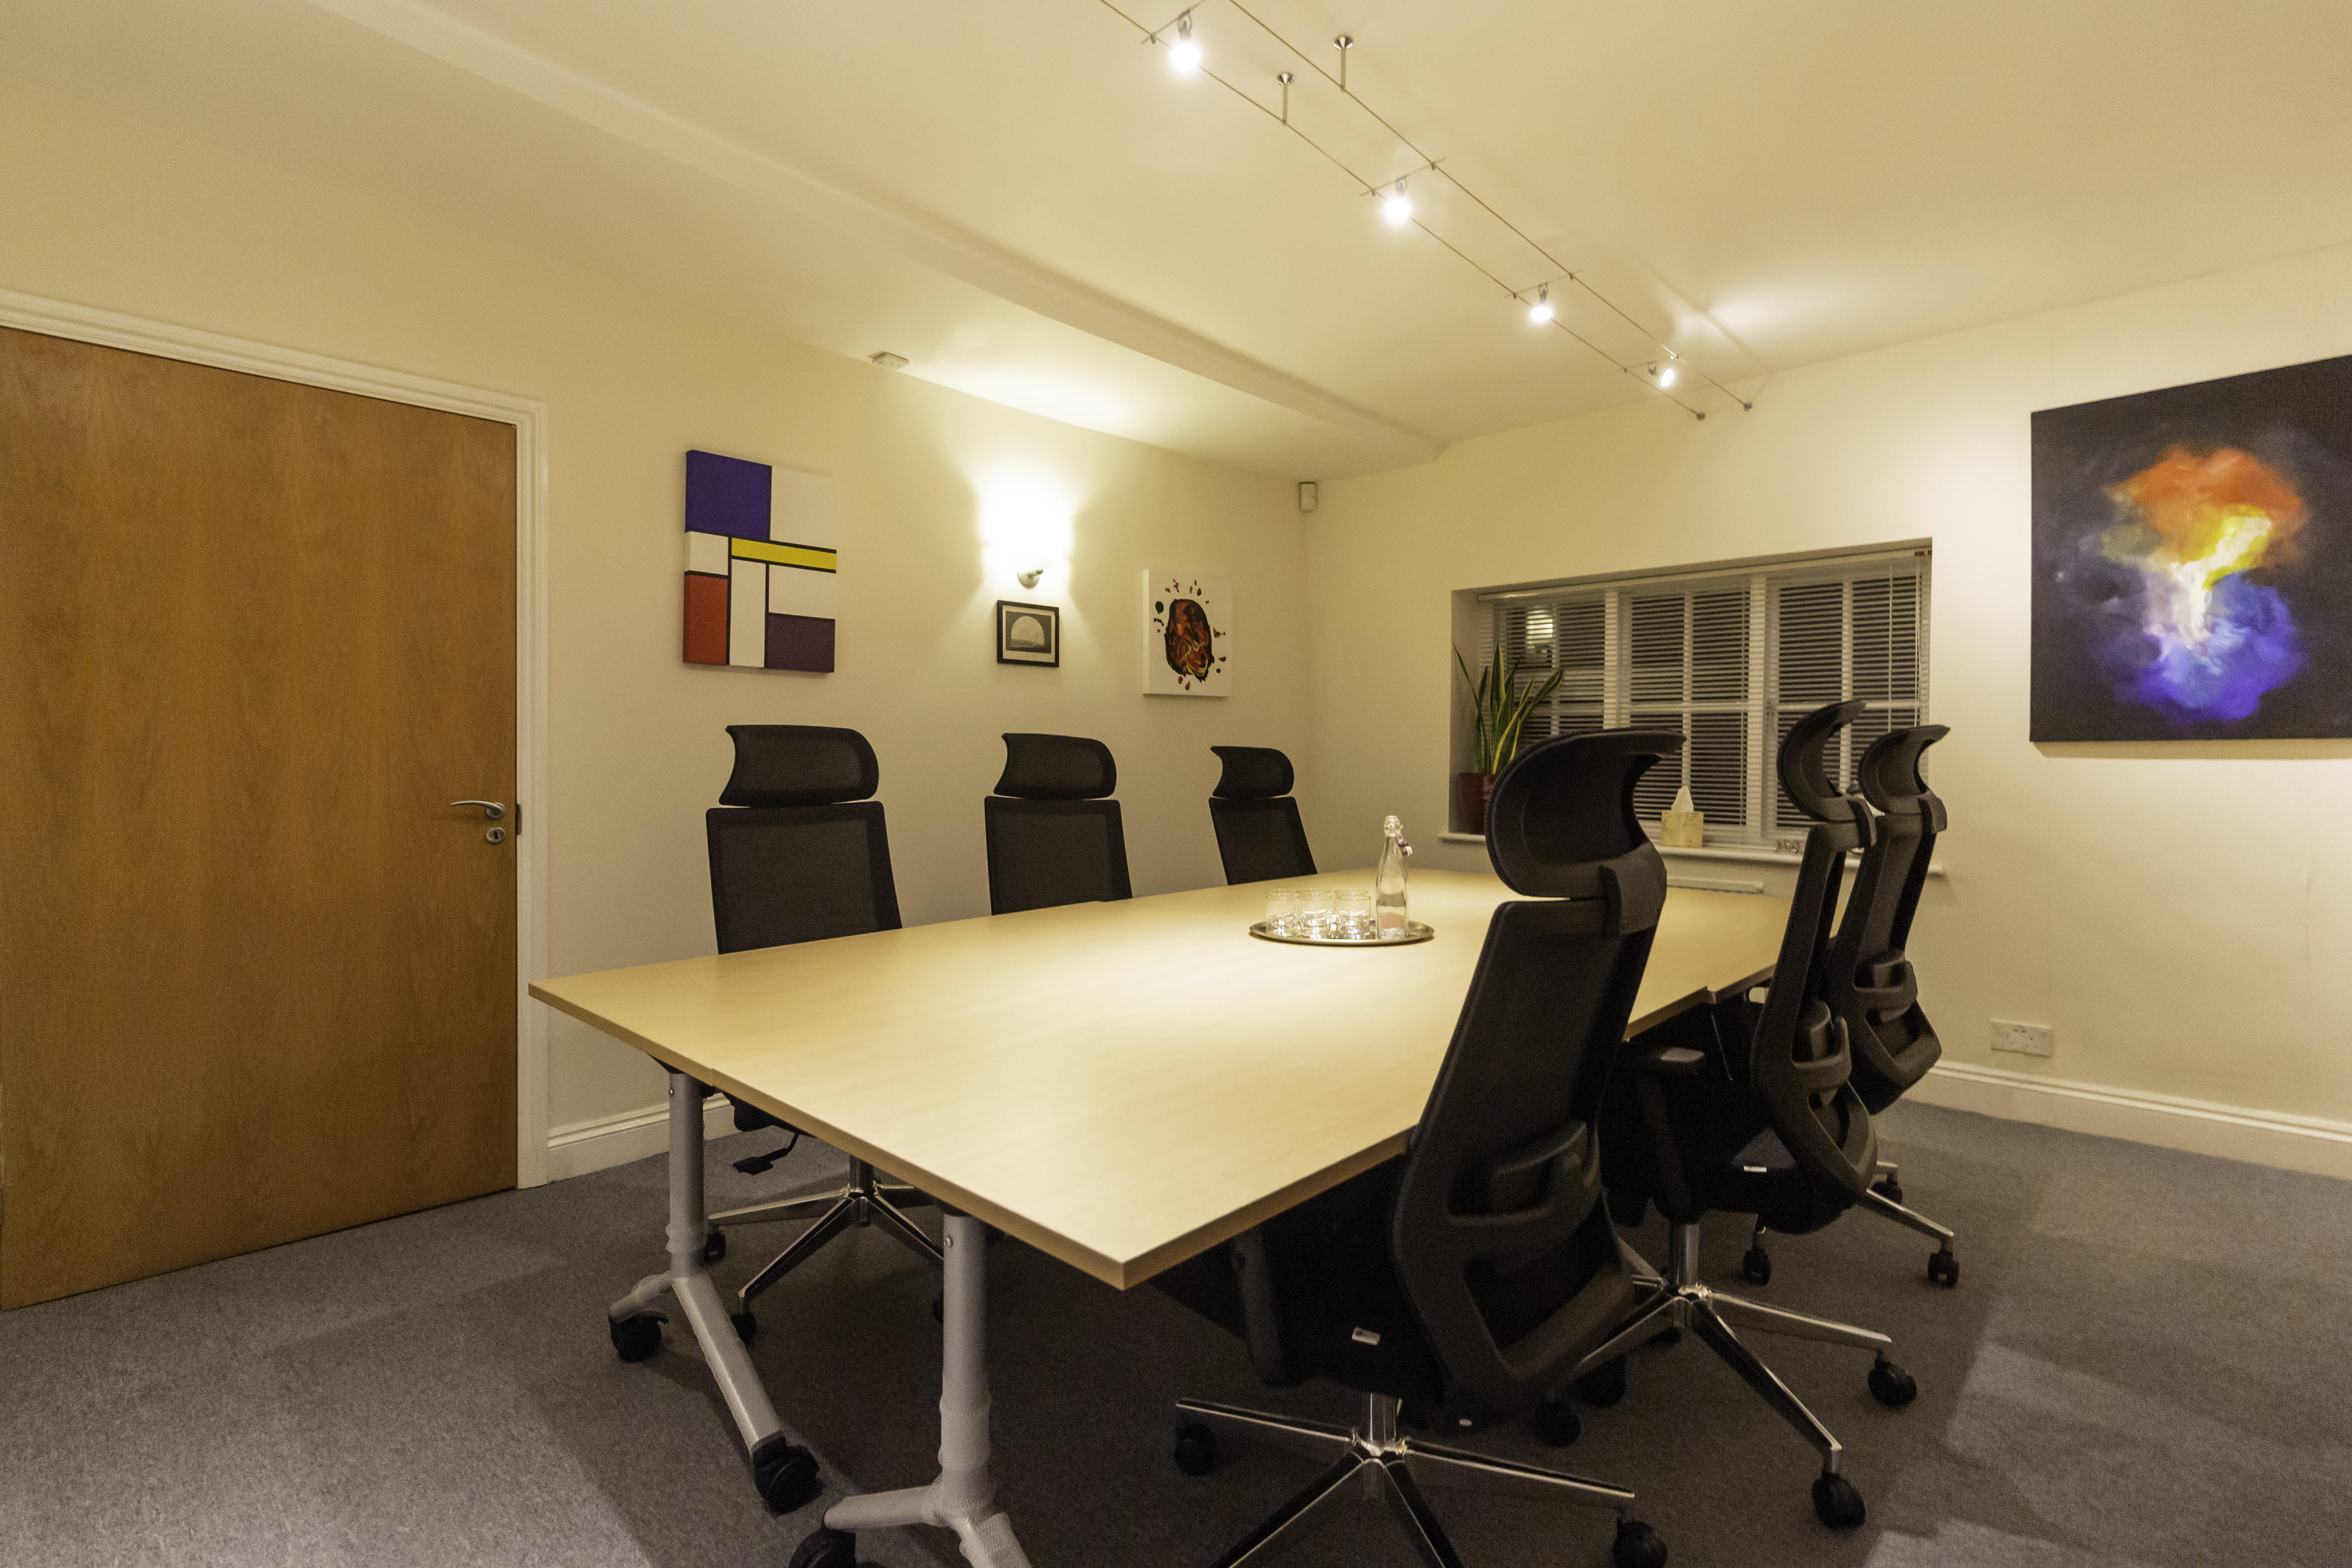 Meeting venue and flexible workspace